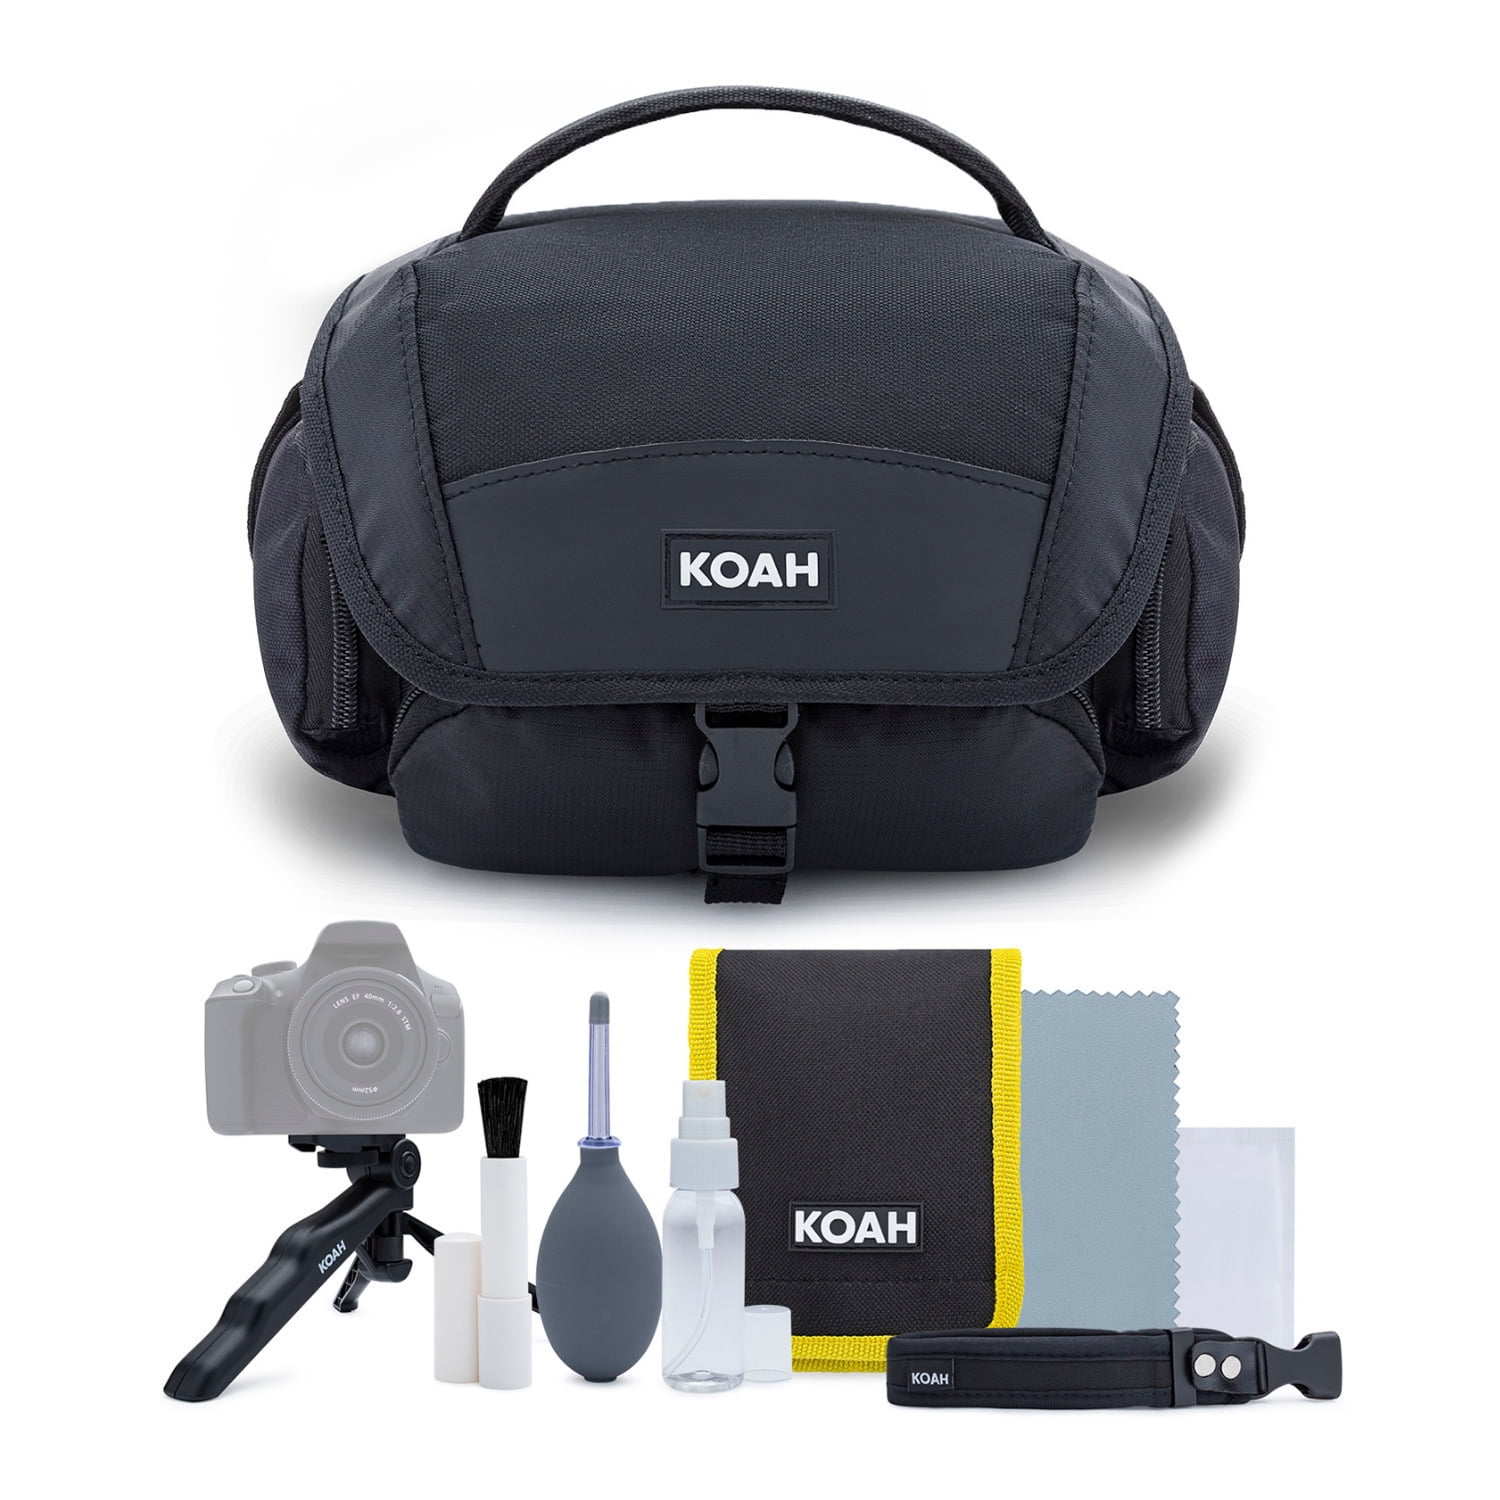 KODAK PIXPRO AZ425 Astro Zoom 20MP Digital Camera (Black) Bundle with 32GB  SD Card, Holster Case and Accessory Kit, Battery and Charger Kit, Cable